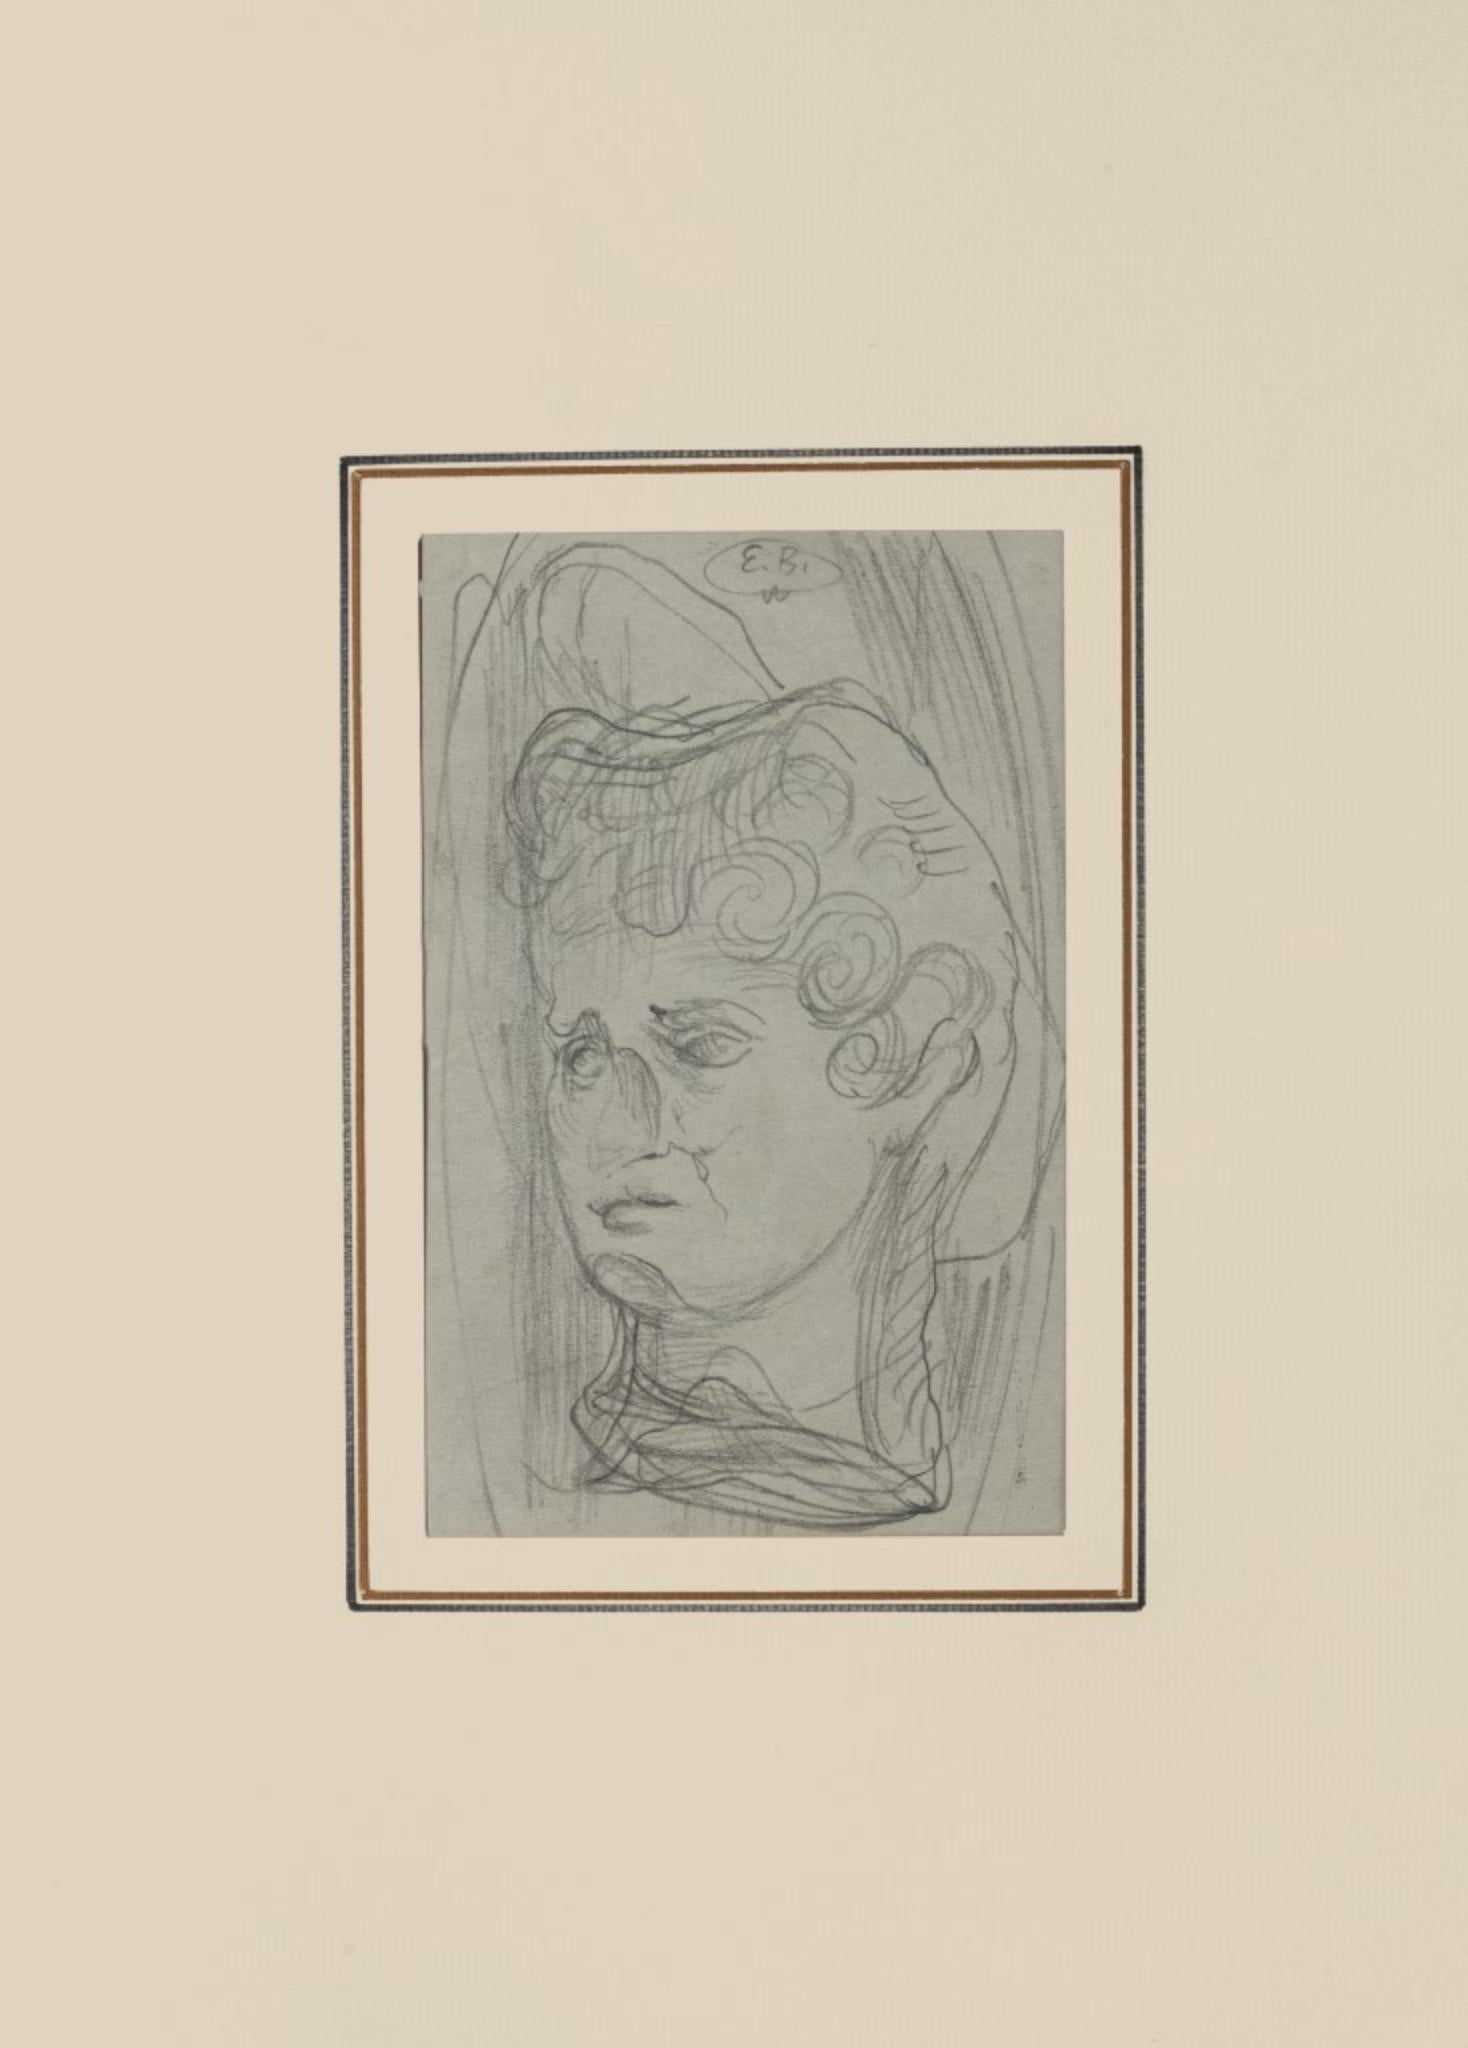 Masked Head is an original monogramm drawing in pencil, realized by Russian scenographer Eugène Berman, hand-signed.

Image Dimension: 35 x 25 cm
 Image Dimensions: 16.5 x 11 cm

In very good conditions. 

The artwork represents a Masked Head.